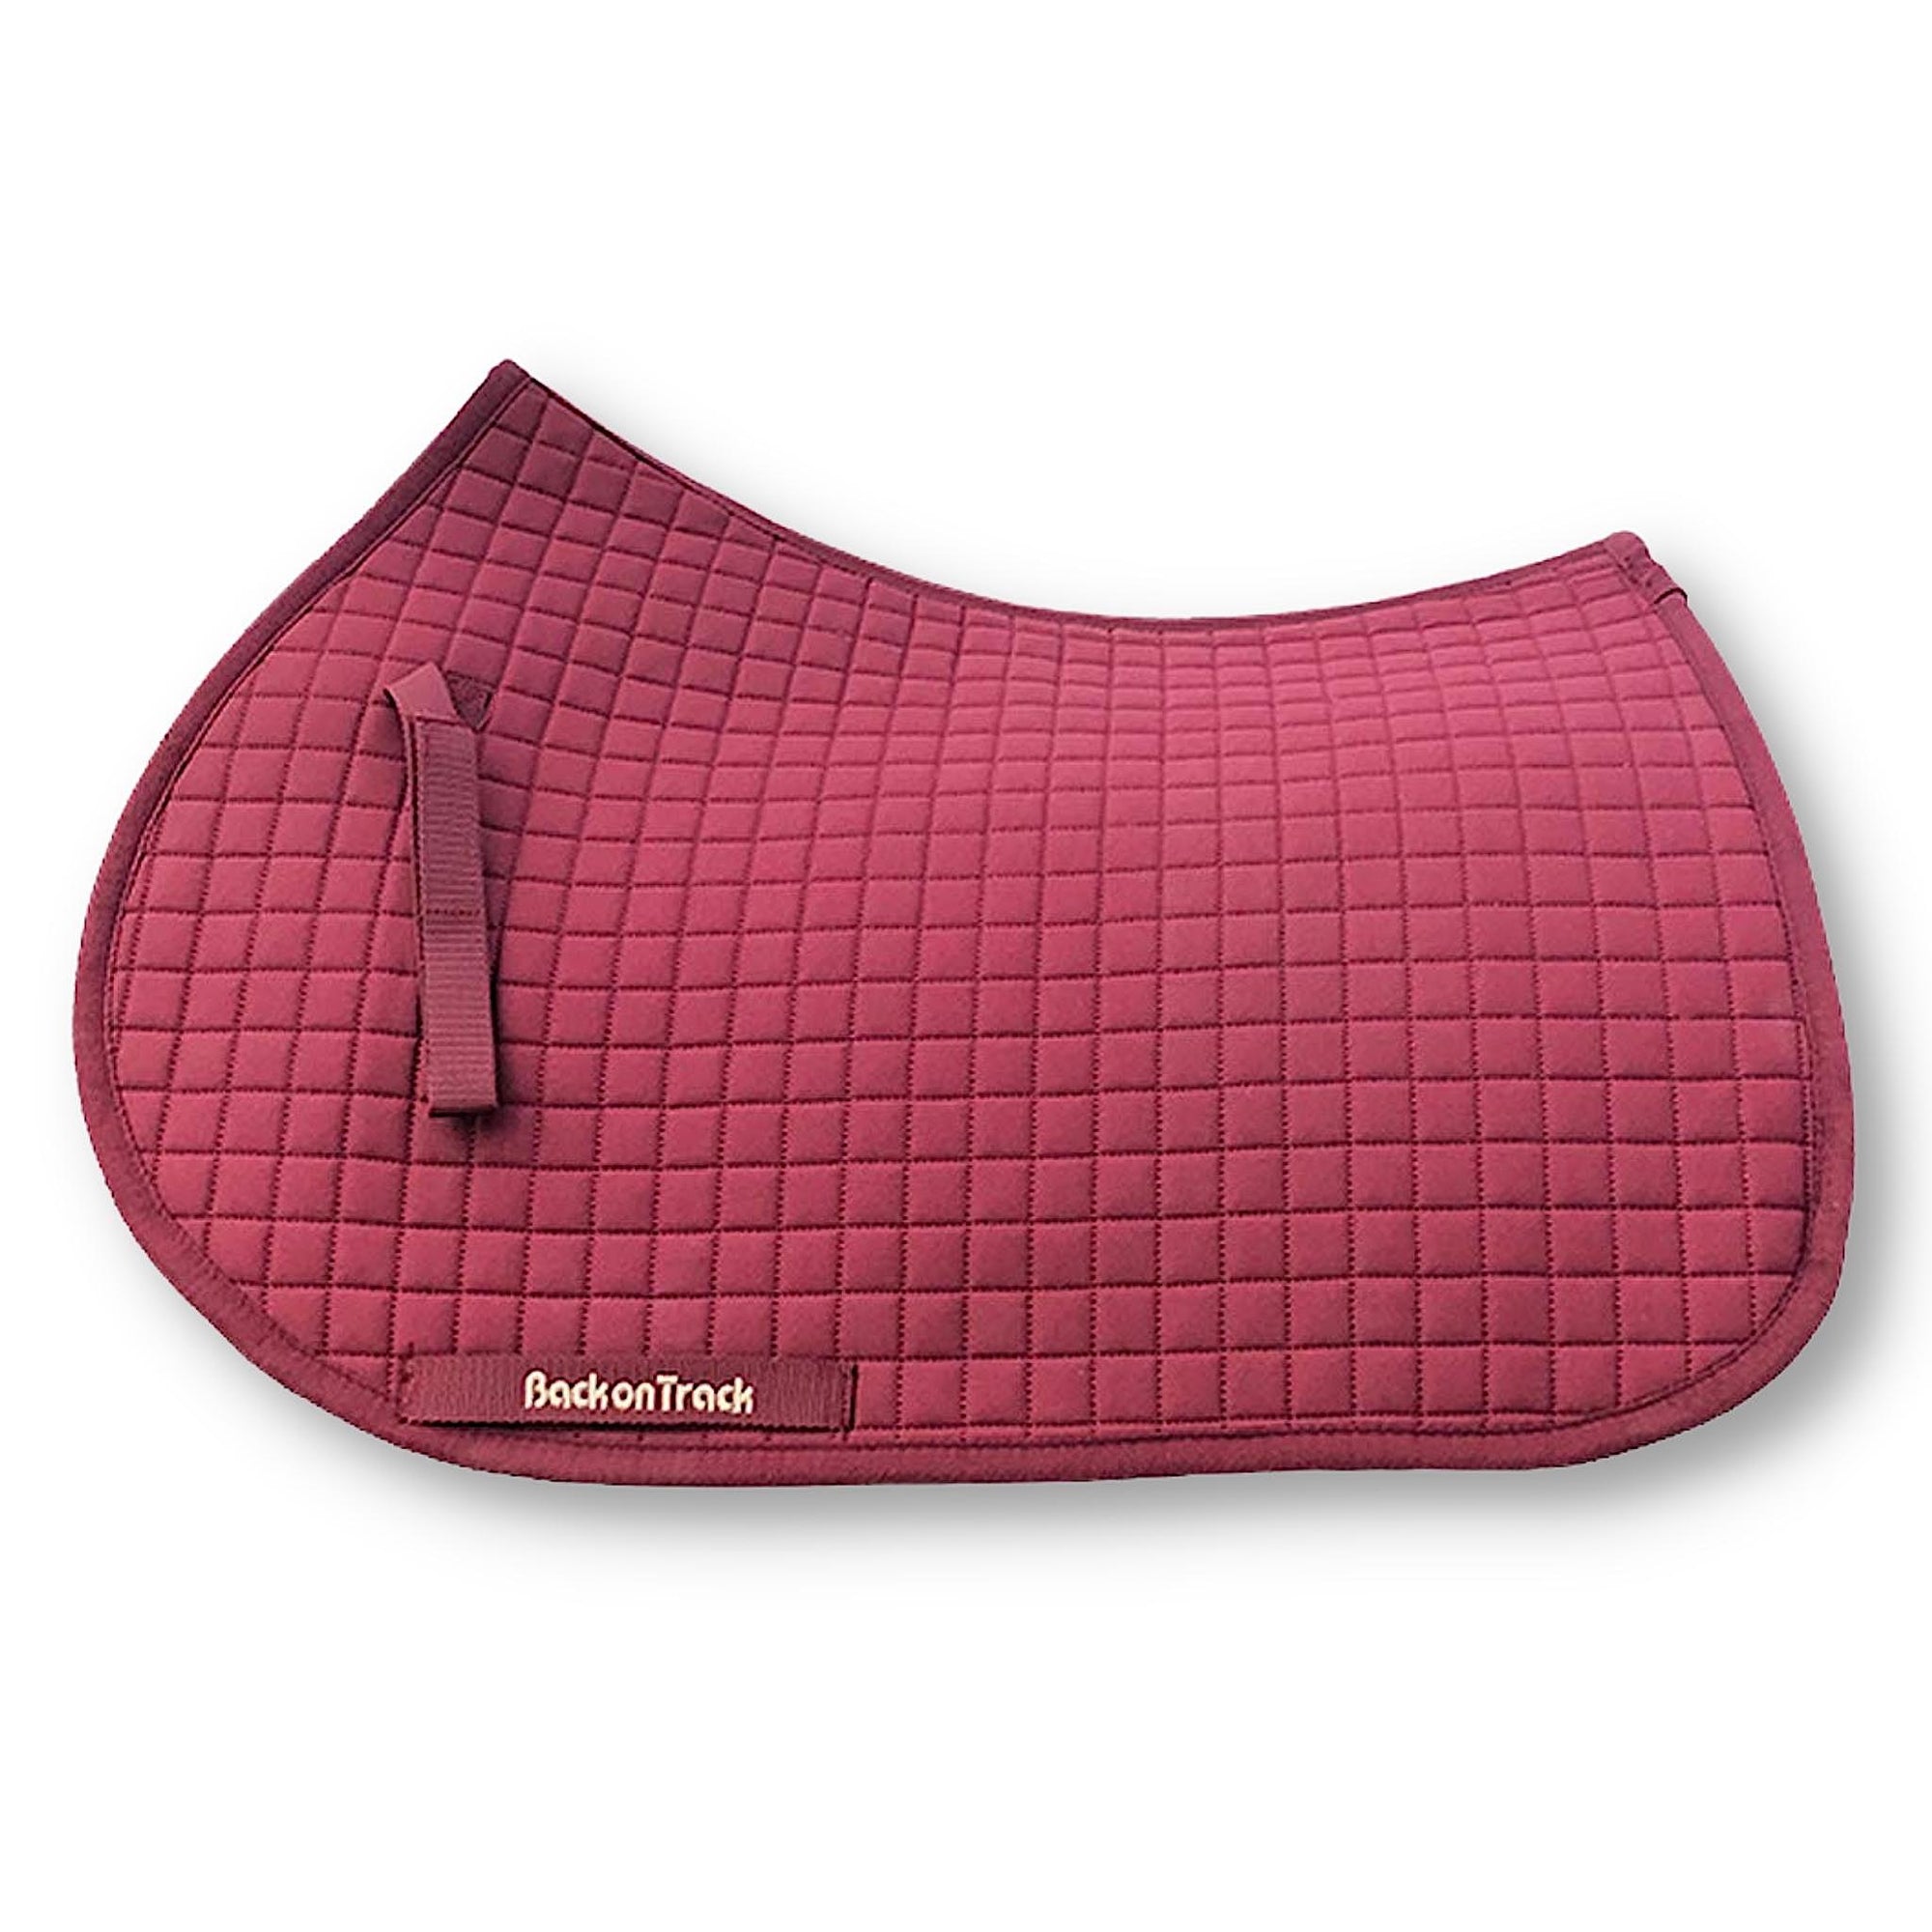 Burgundy, navy, black and white saddle pads with Velcro straps.